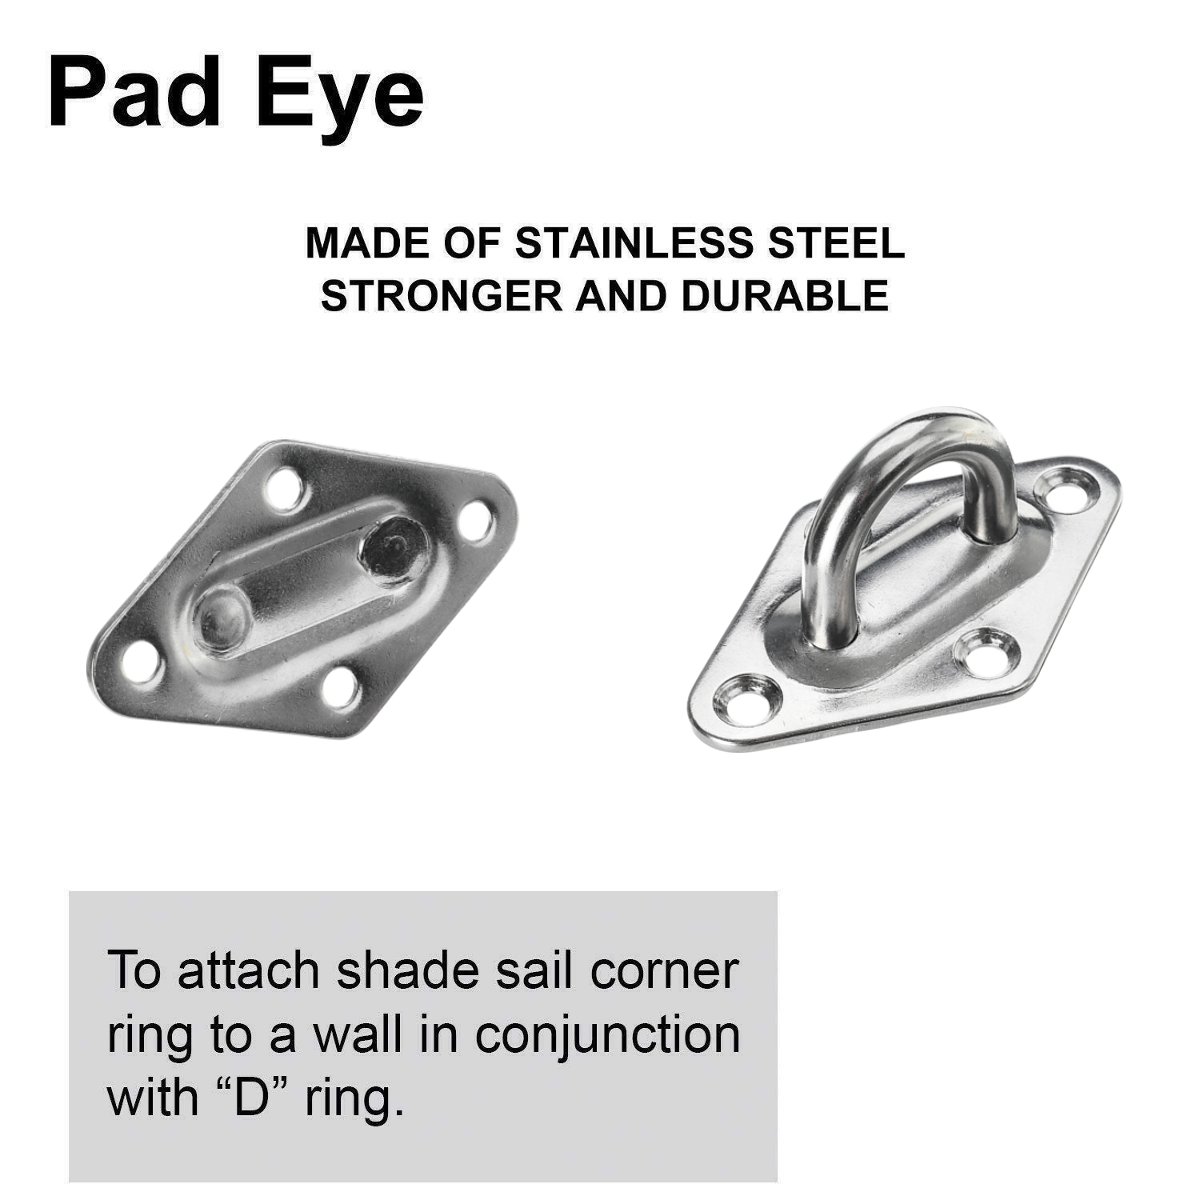 Stainless-Steel-Sun-Sail-Shade-Fixing-Accessory-Kit-Garden-Patio-Canopy-DIY-Replacement-Accessories-1564076